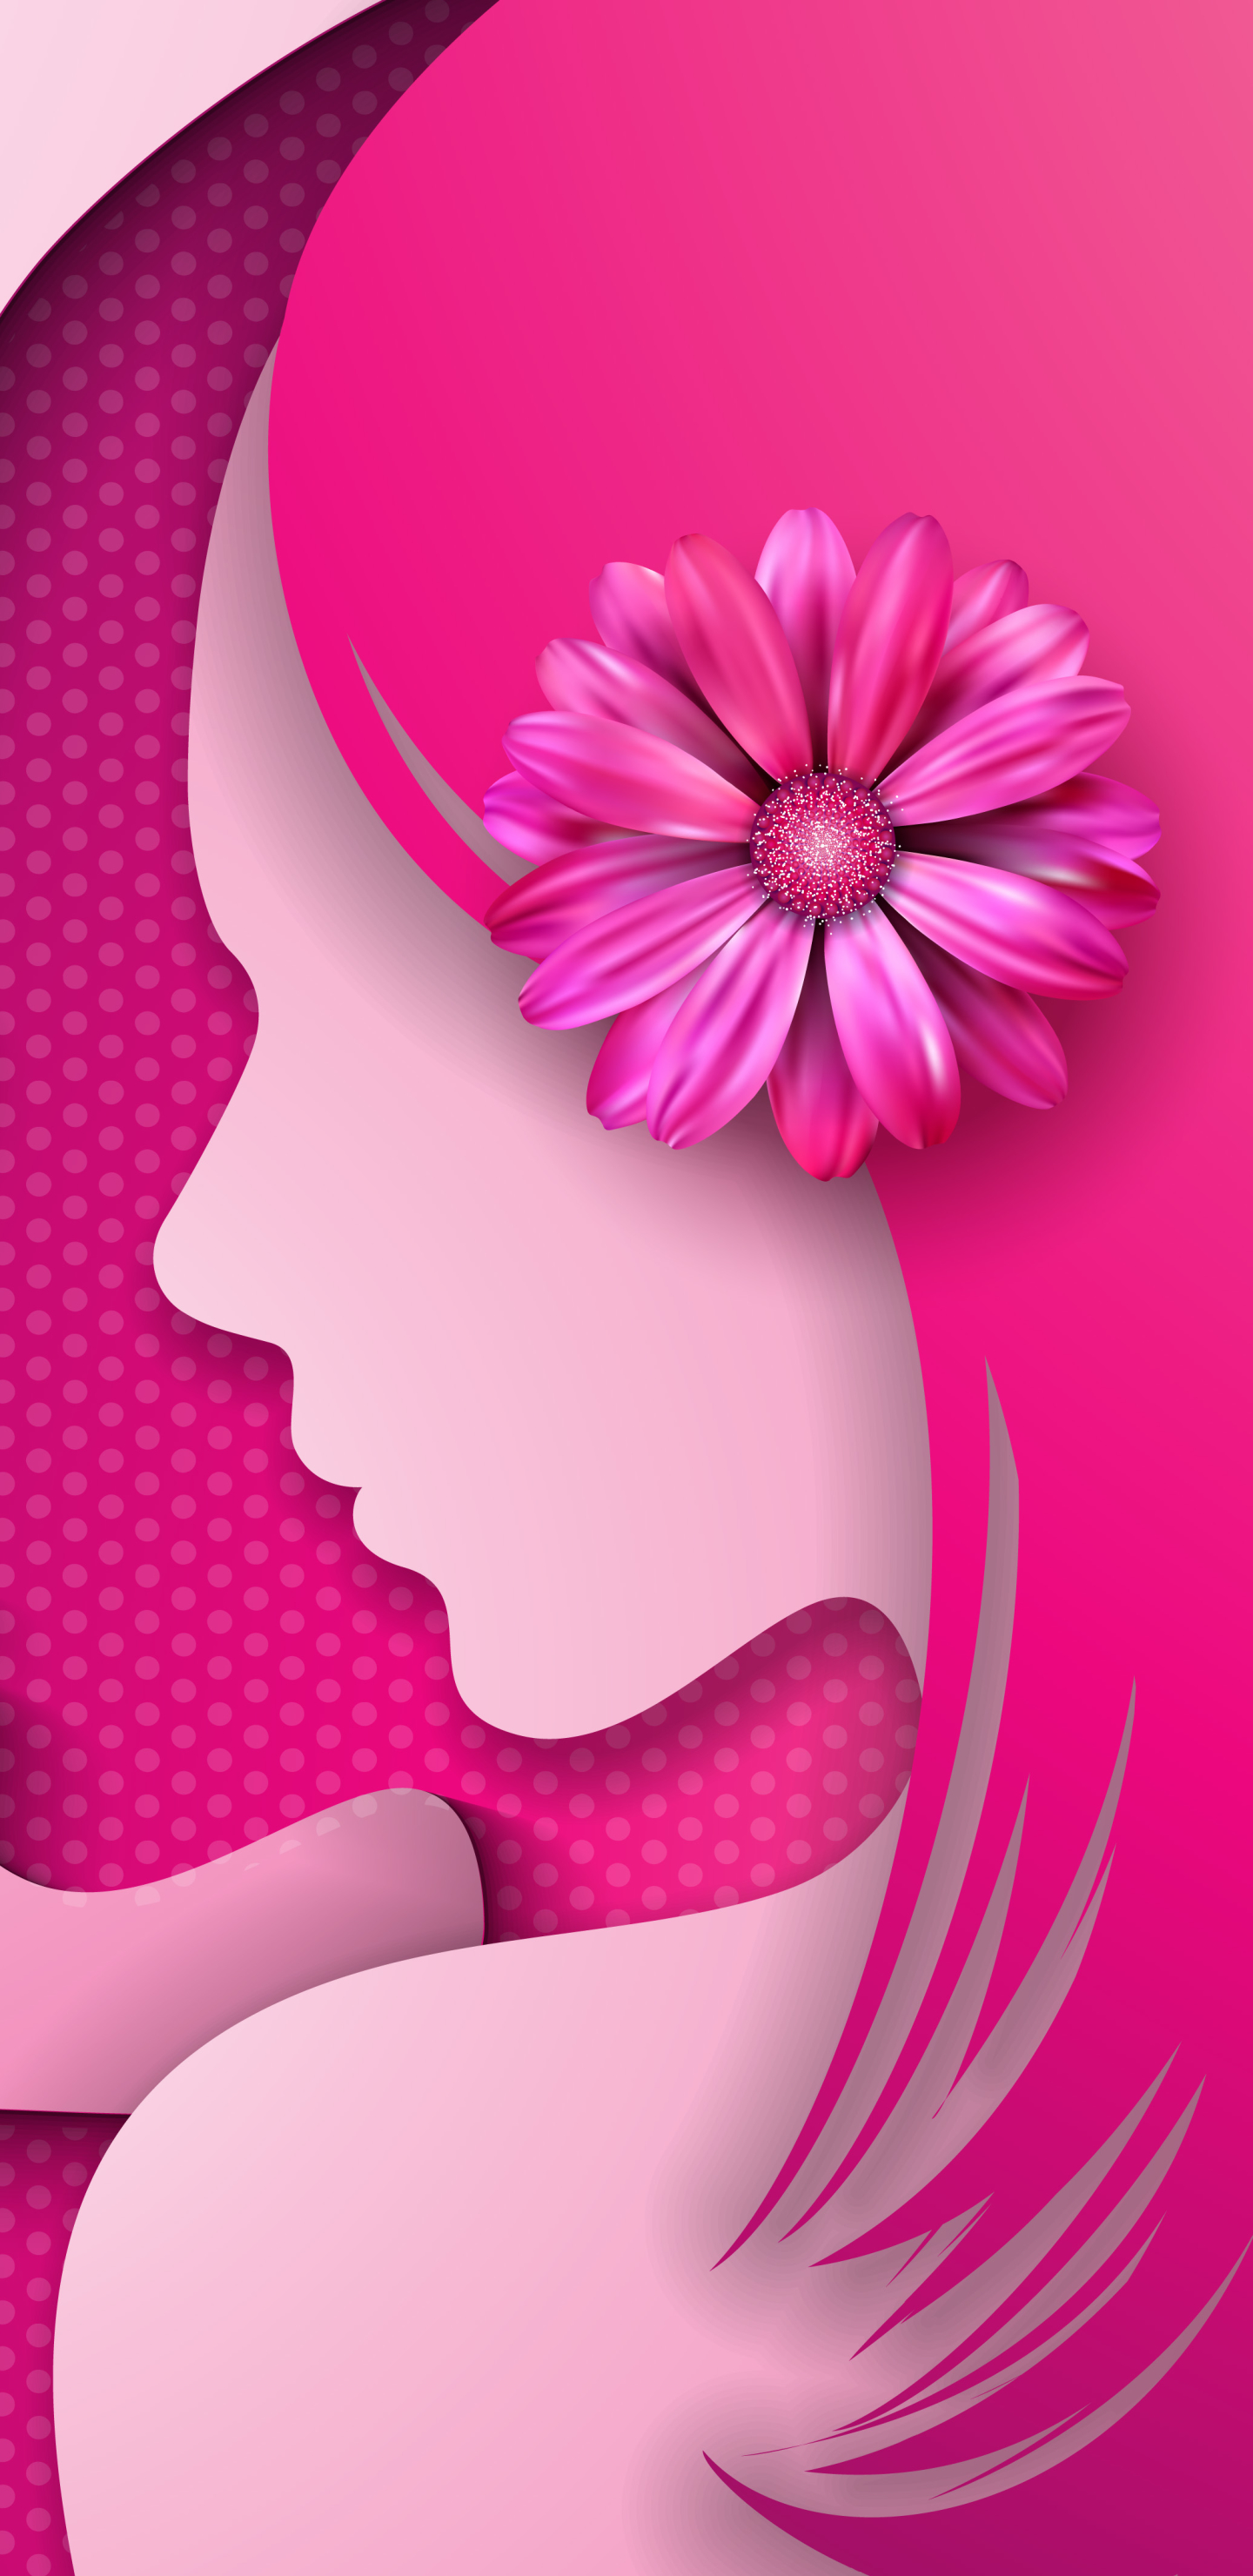 women's day, holiday, happy women's day for android